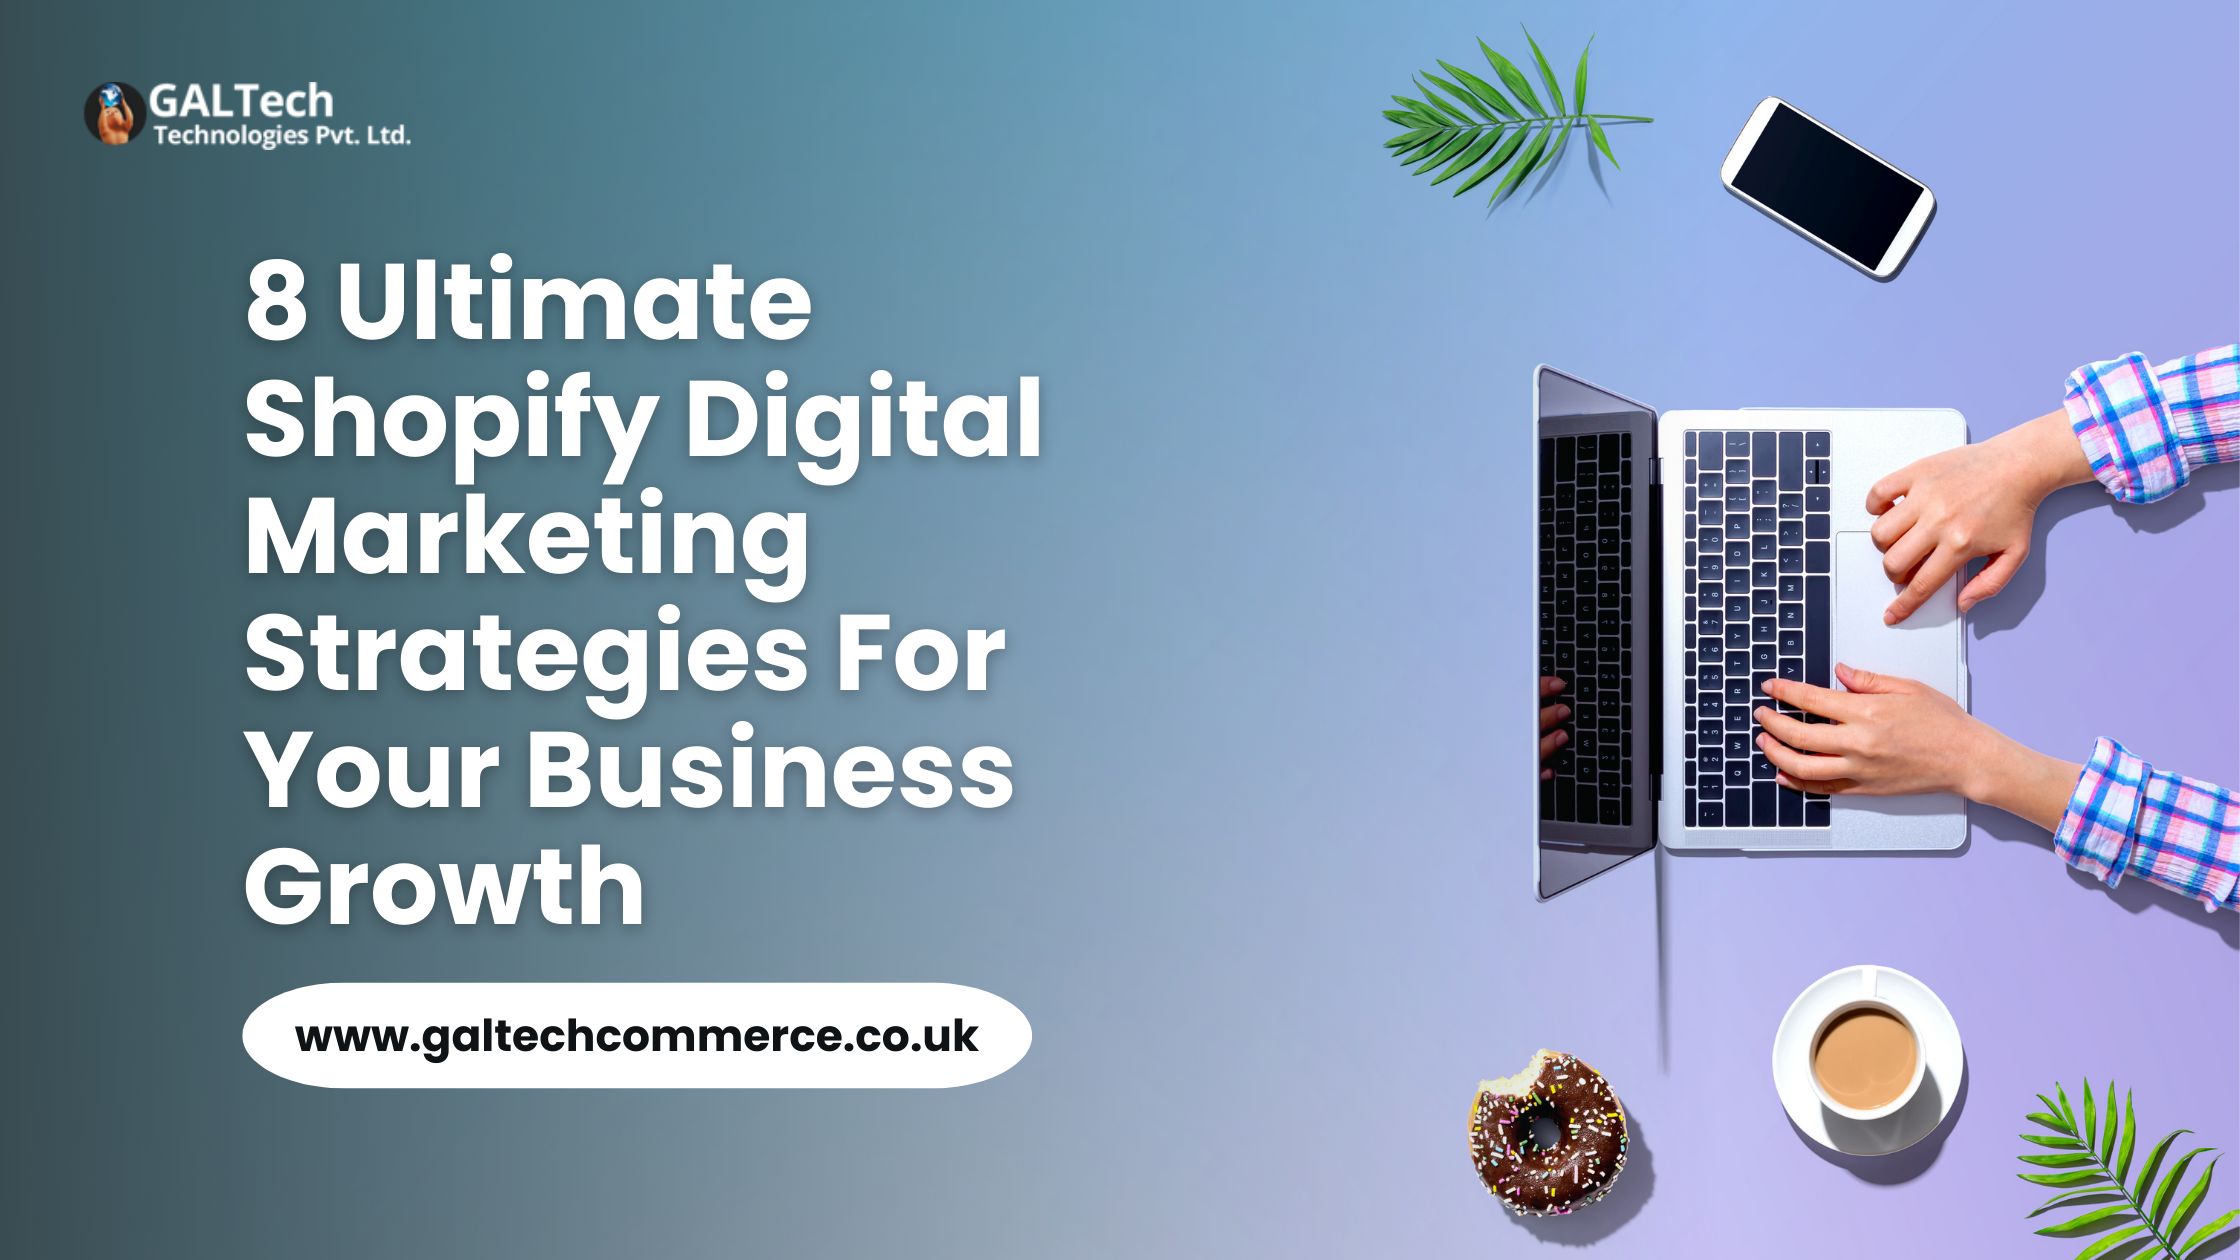 8 Ultimate Shopify Digital Marketing Strategies For Your Business Growth